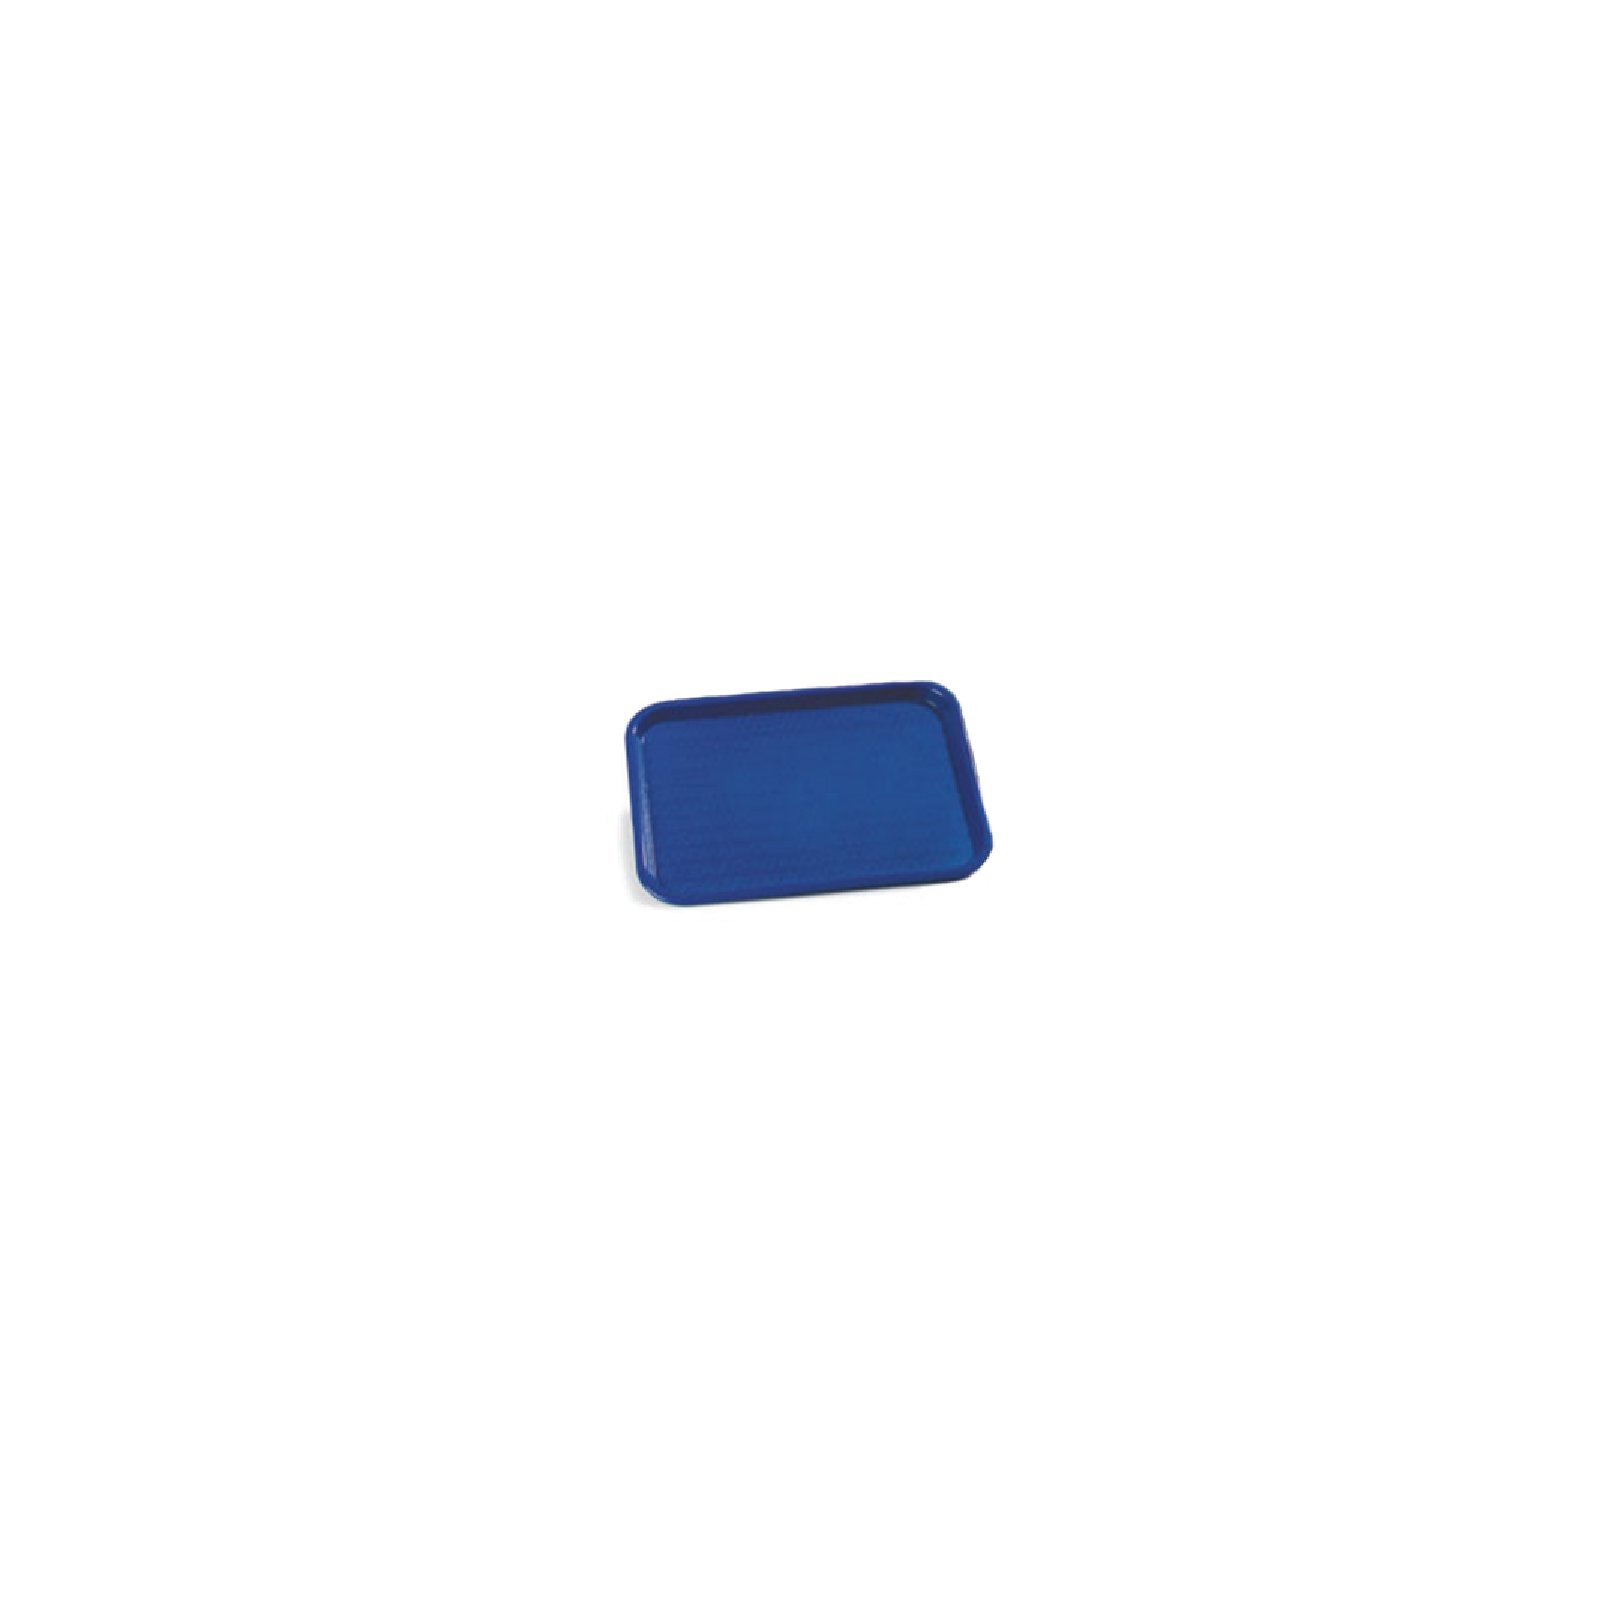 CT101414 - Cafe® Fast Food Cafeteria Tray 10 x 14 - Blue